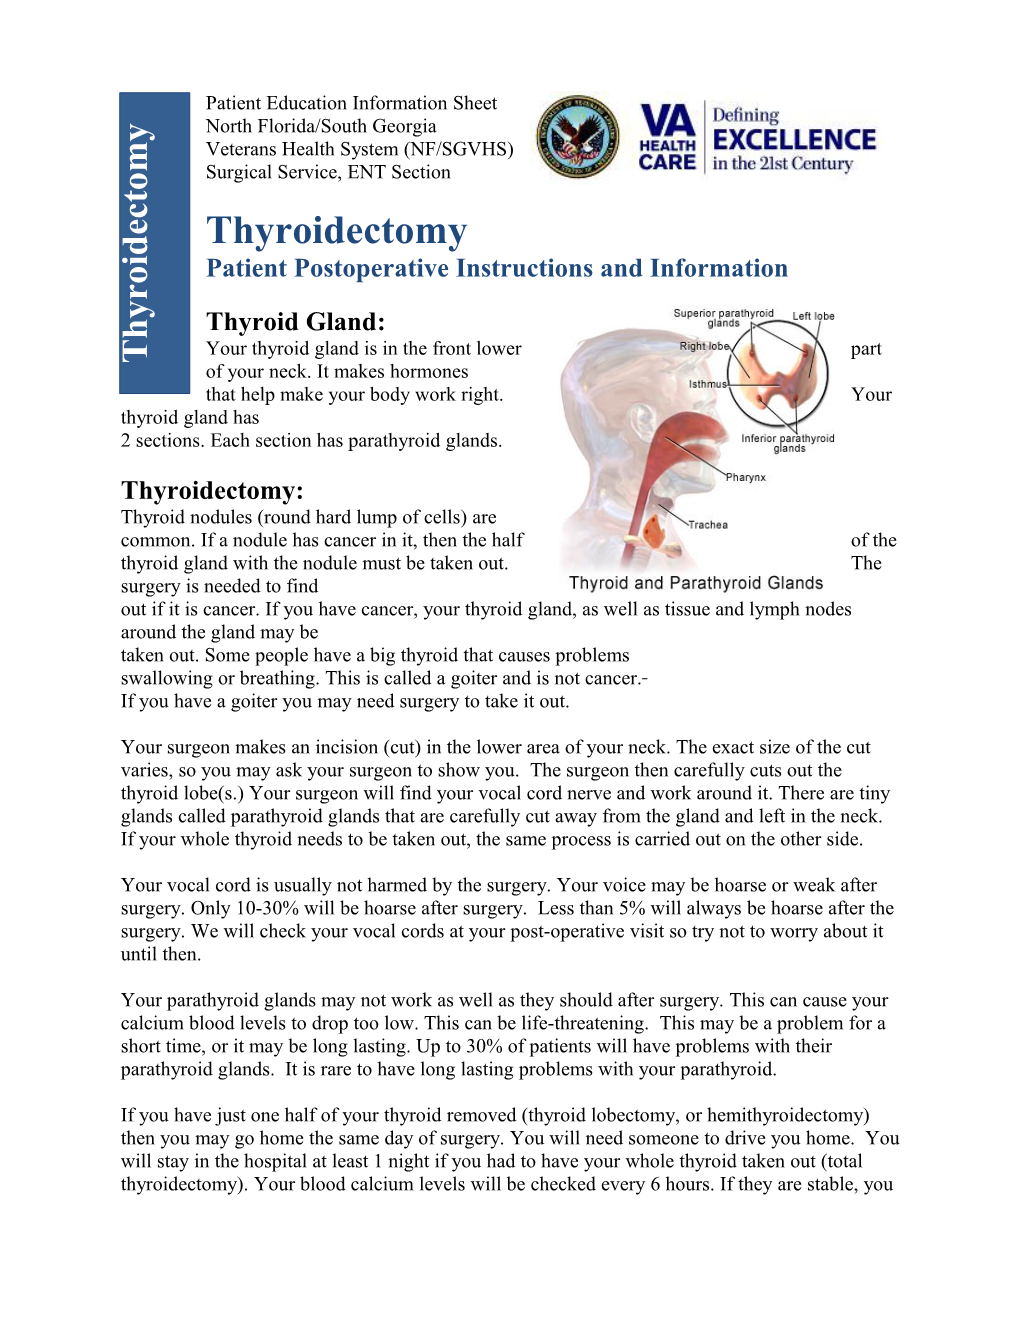 Thyroidectomy: Patient Postoperative Instructions And Information